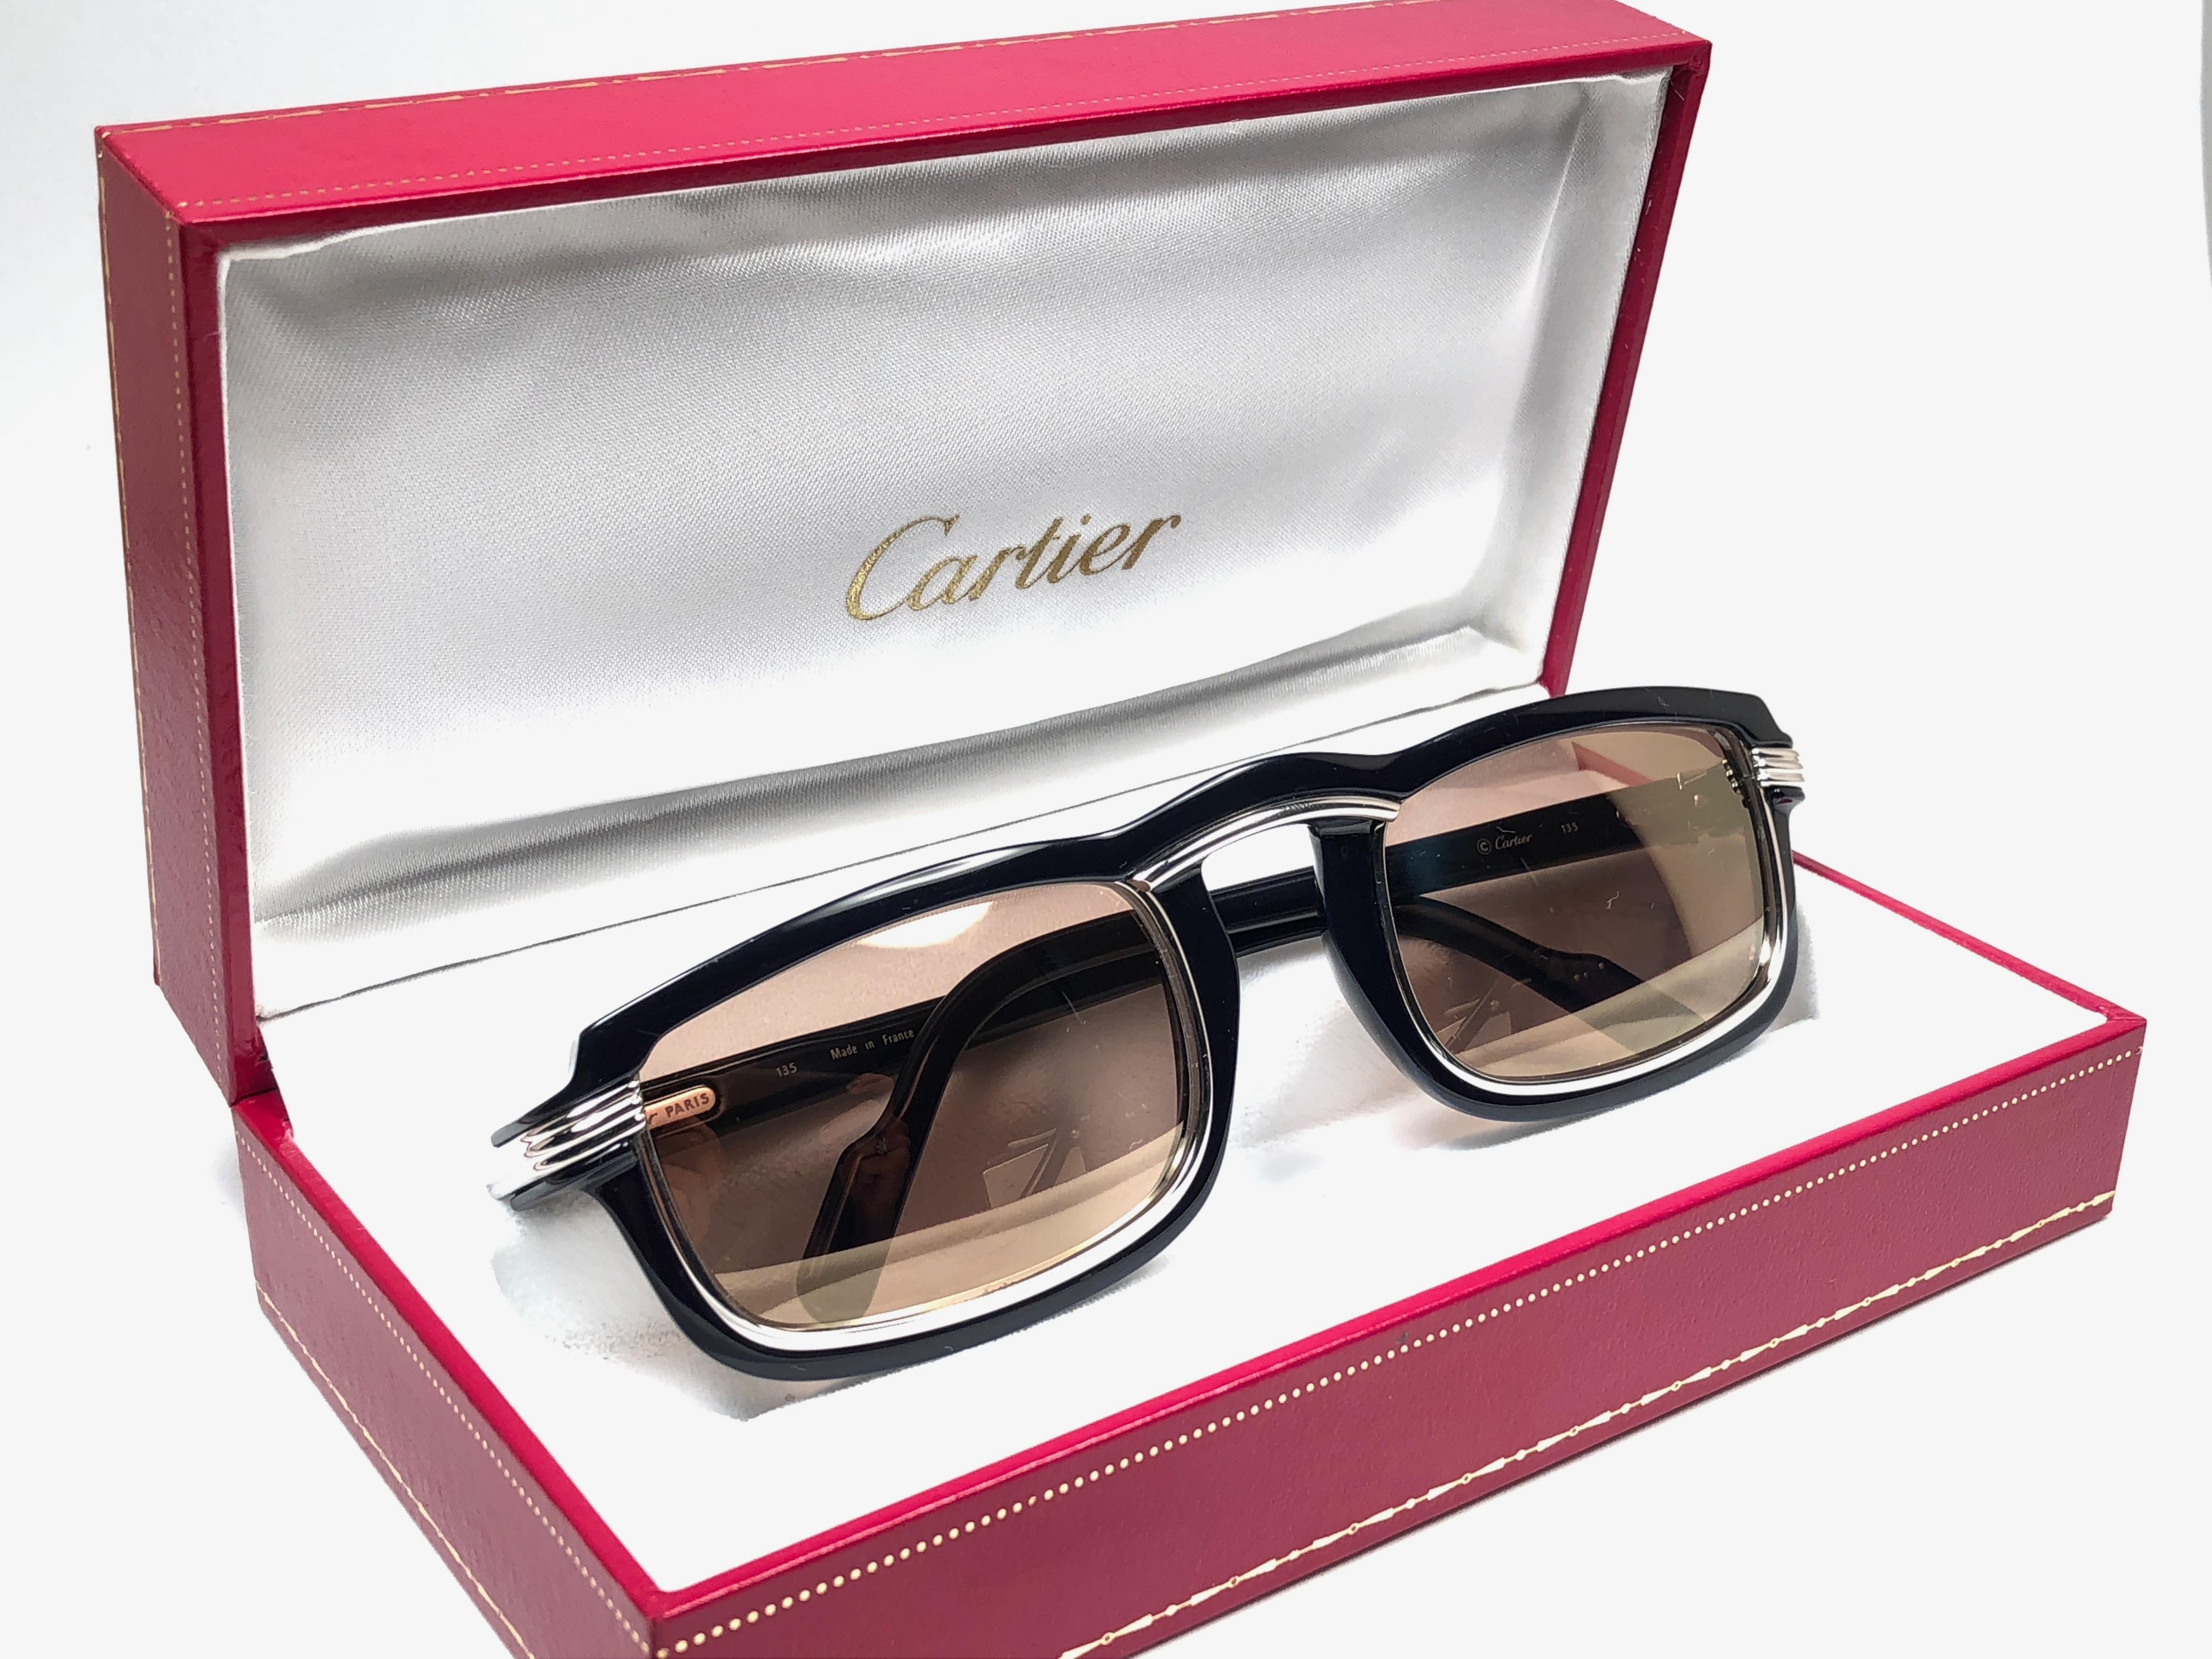 1991 Original Cartier Vertigo Art Deco Sunglasses with spotless amazing brown gold mirrored (uv protection). 
Frame has the famous platinum accents in the middle and on the sides.
All hallmarks. Cartier signs on the earpaddles. Both arms sport the C